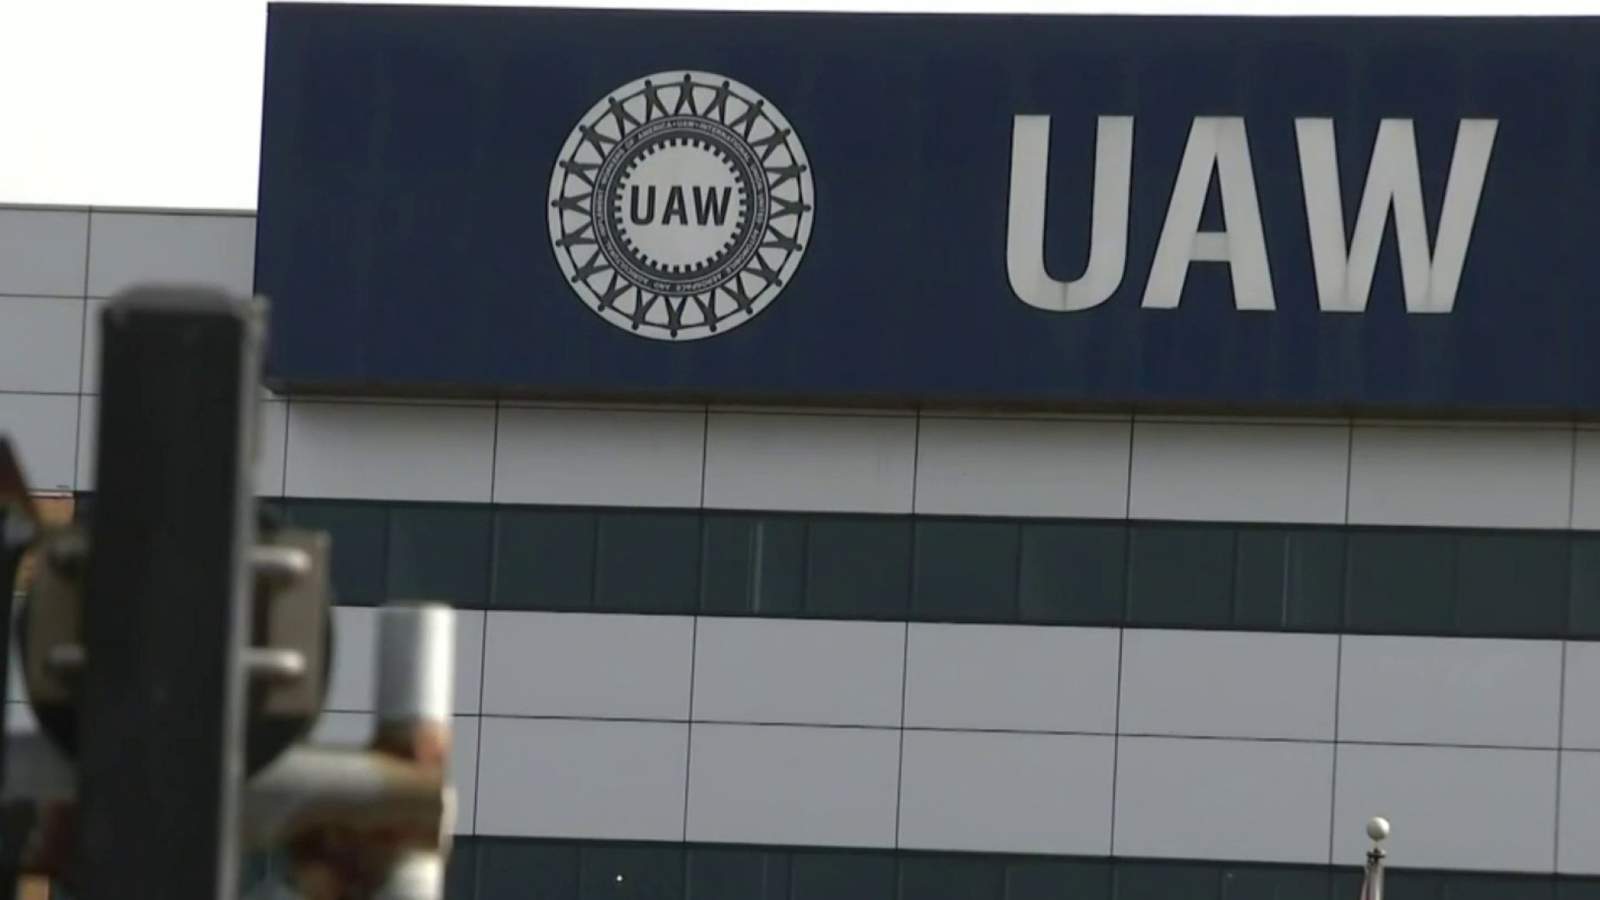 Federal judge approves consent decree for independent monitor to oversee UAW’s finances, operations